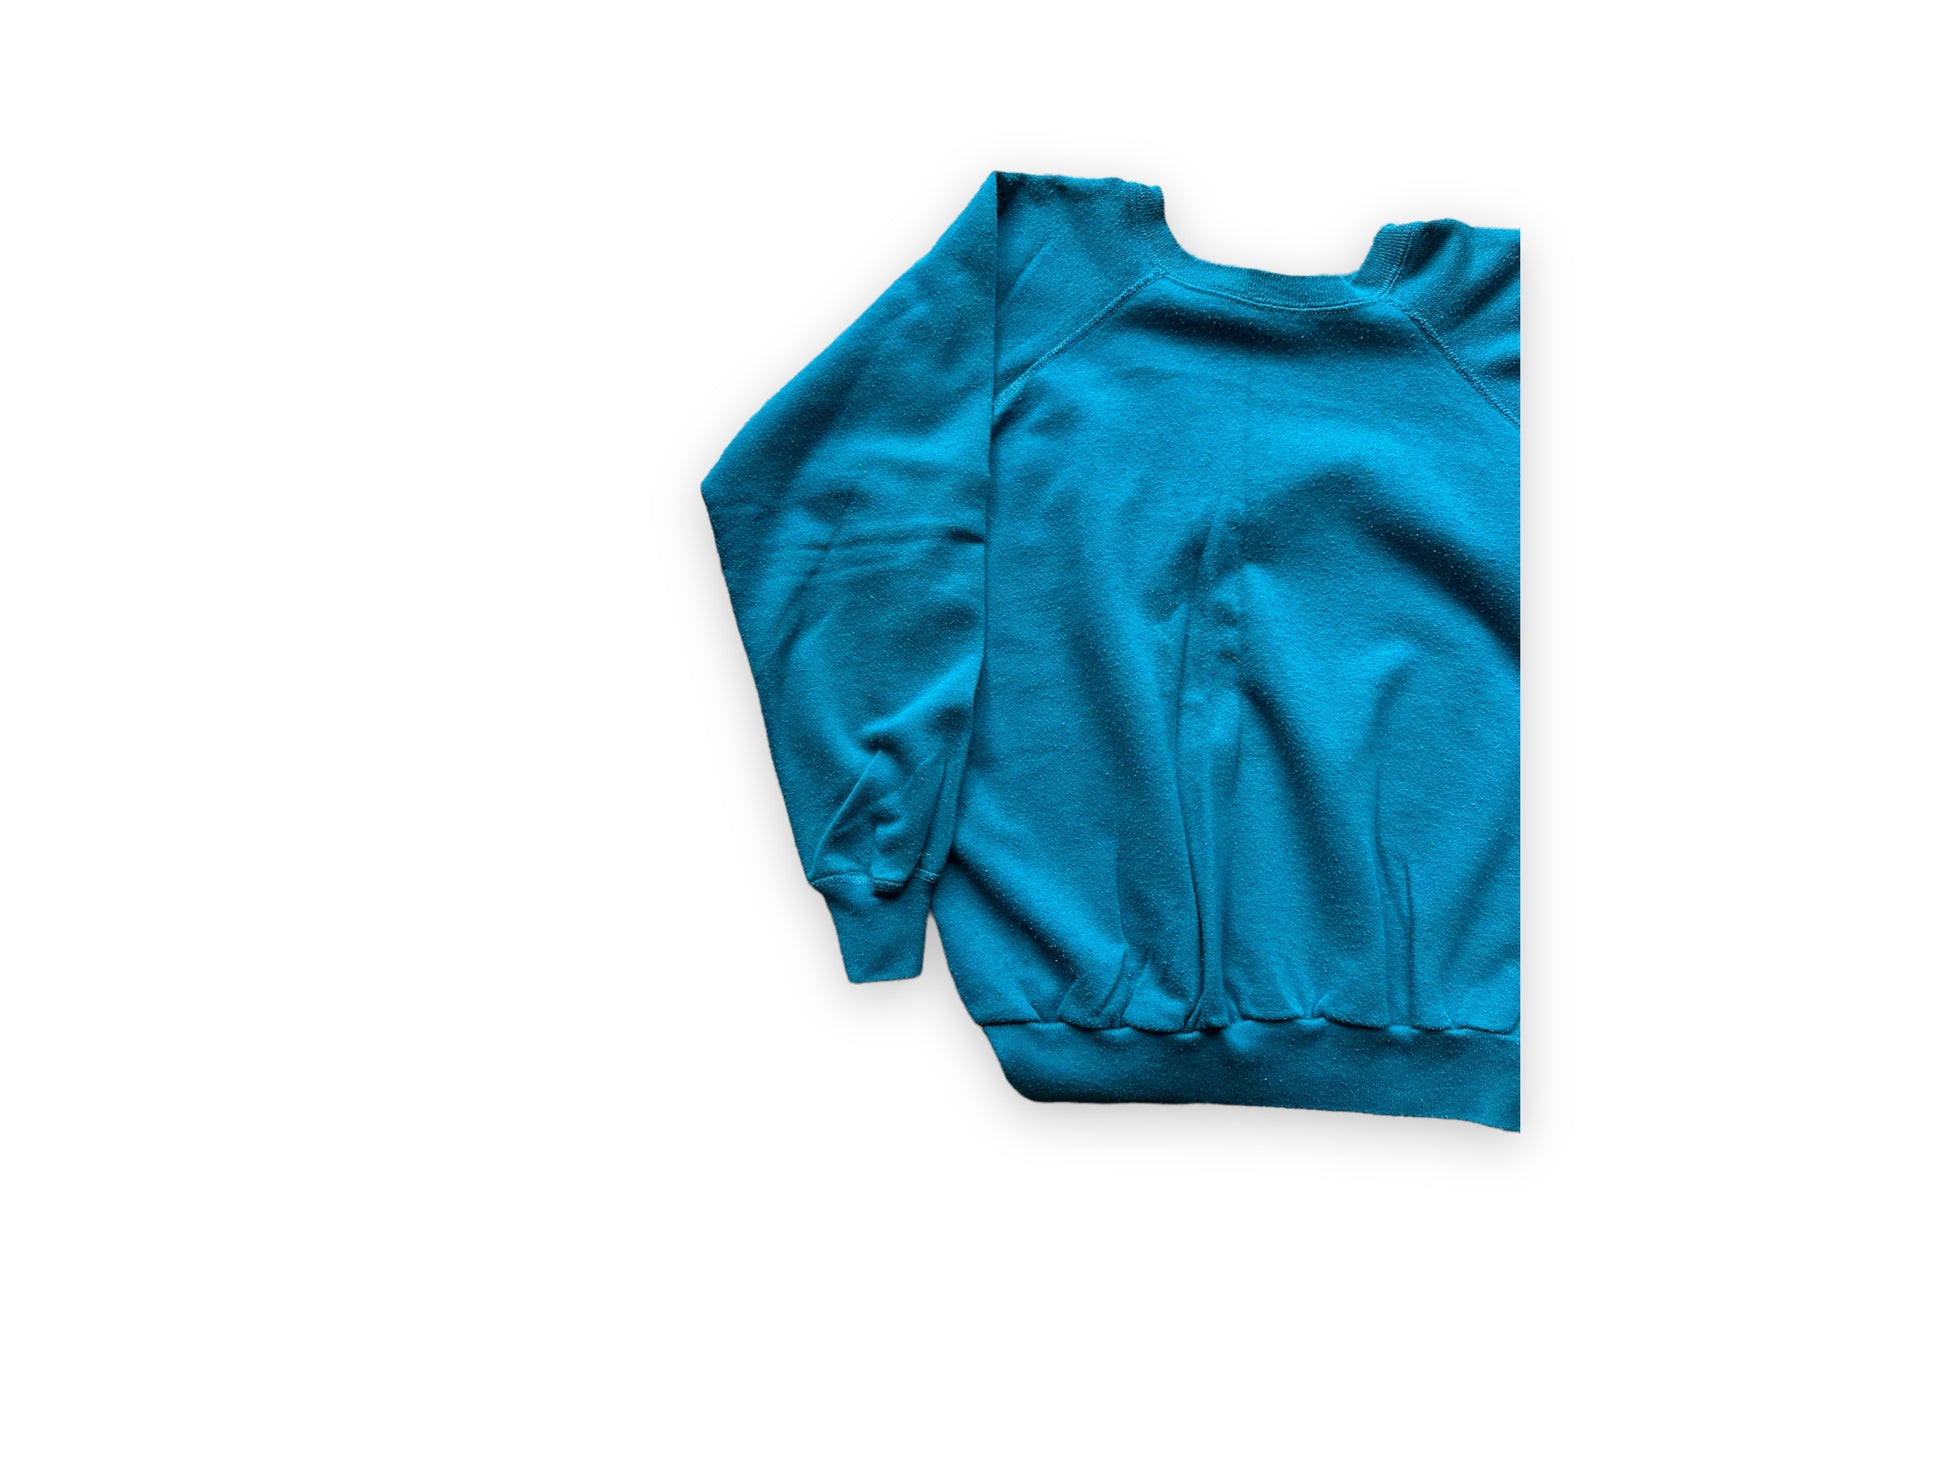 Front Right View of Vintage Teal Raglan Blank Crewneck Sweatshirt | Vintage Crewneck Sweatshirt Seattle | Barn Owl Vintage Clothing